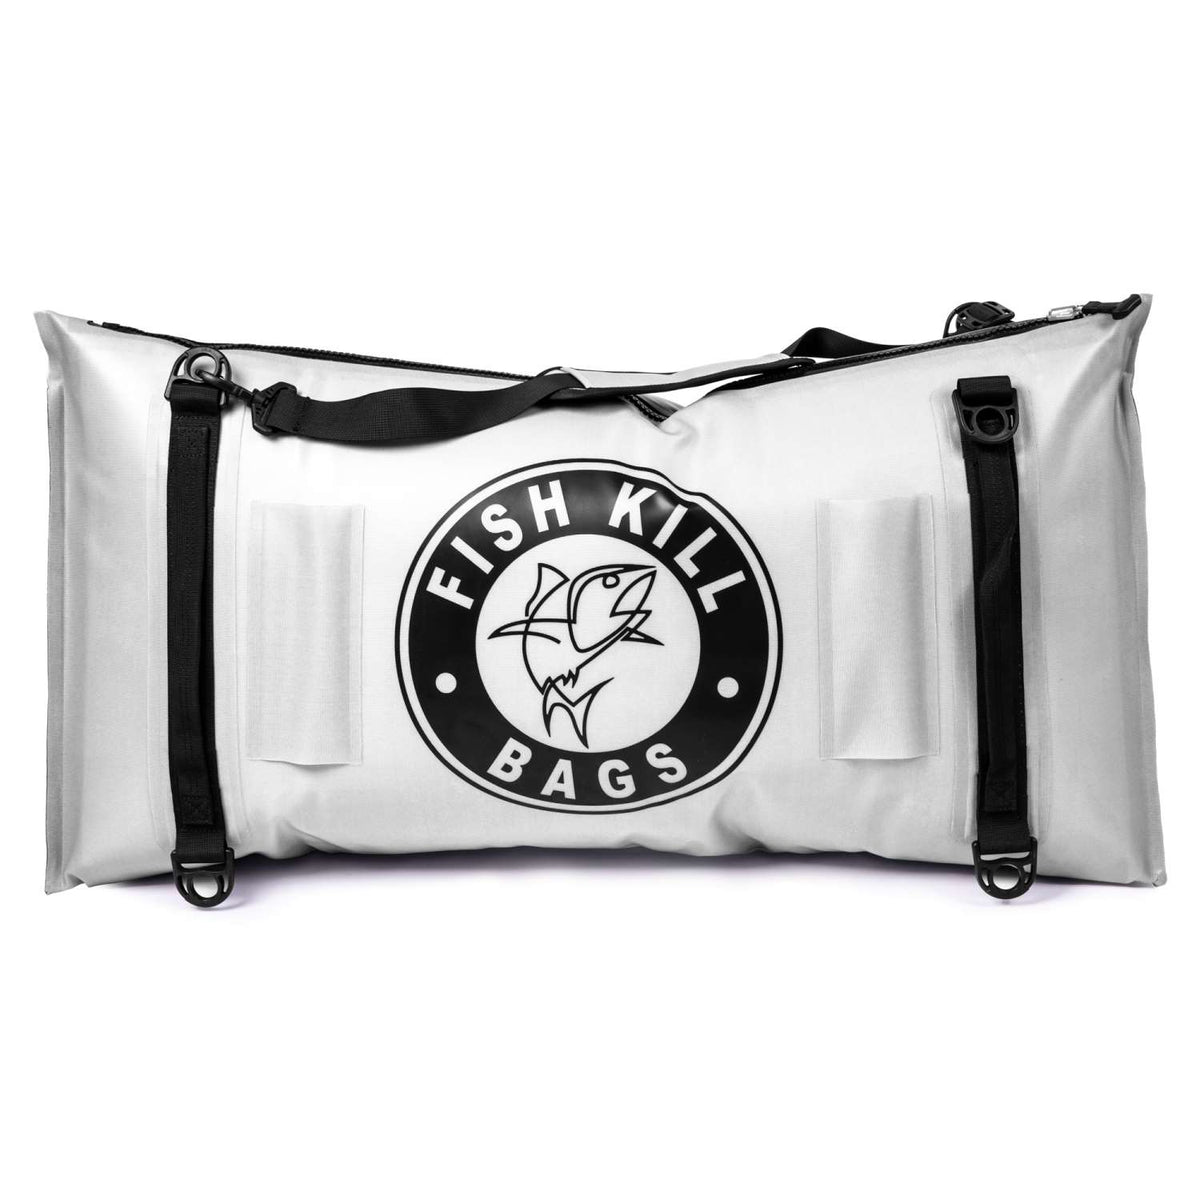 Shop Now Best Insulated Fish Kill Bags in USA at FishKillBags